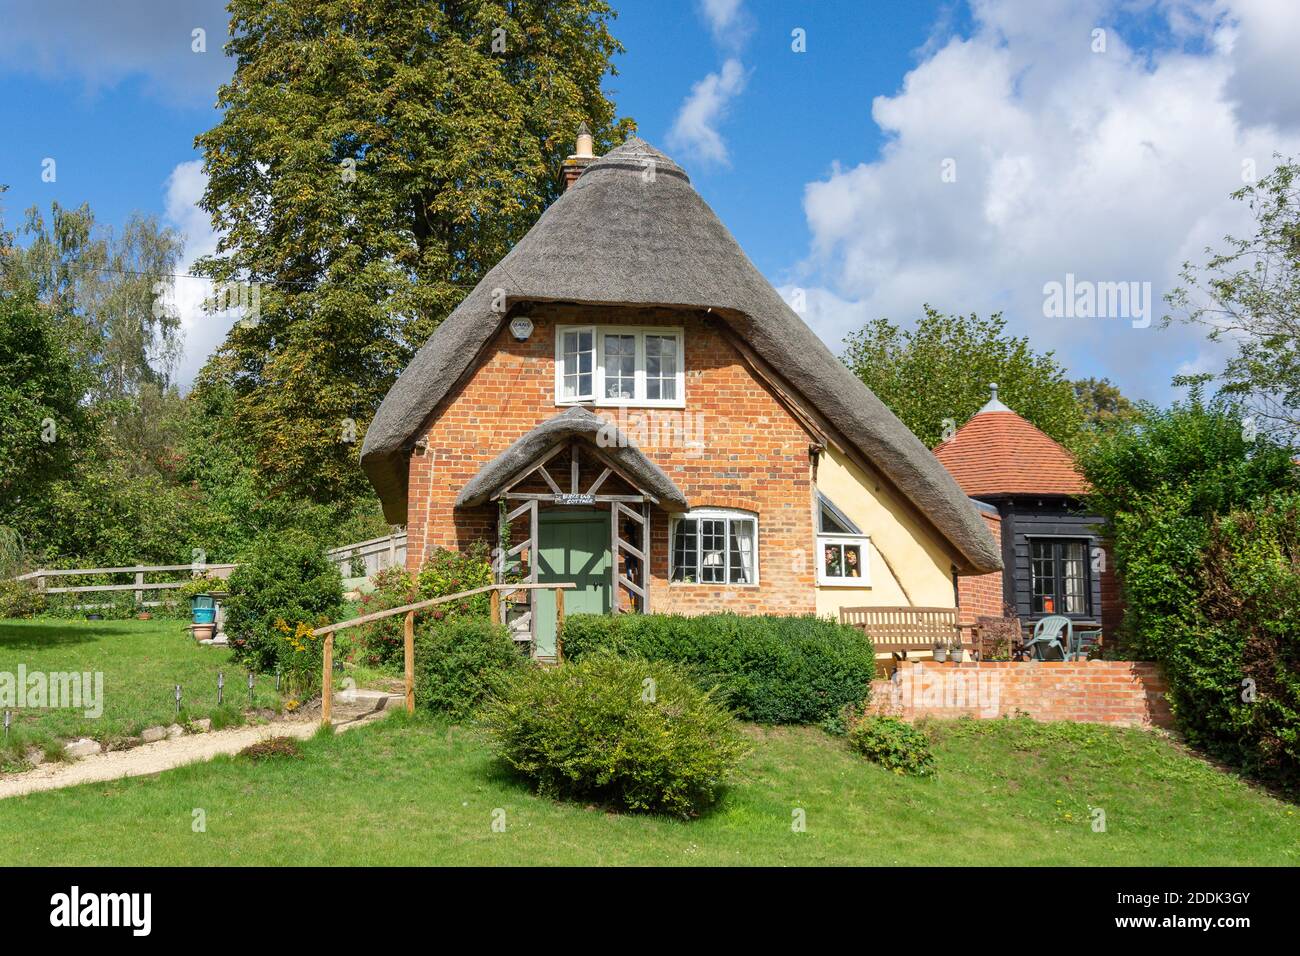 Thatched cottage, High Street, Clifton Hampden, Oxfordshire, England, United Kingdom Stock Photo